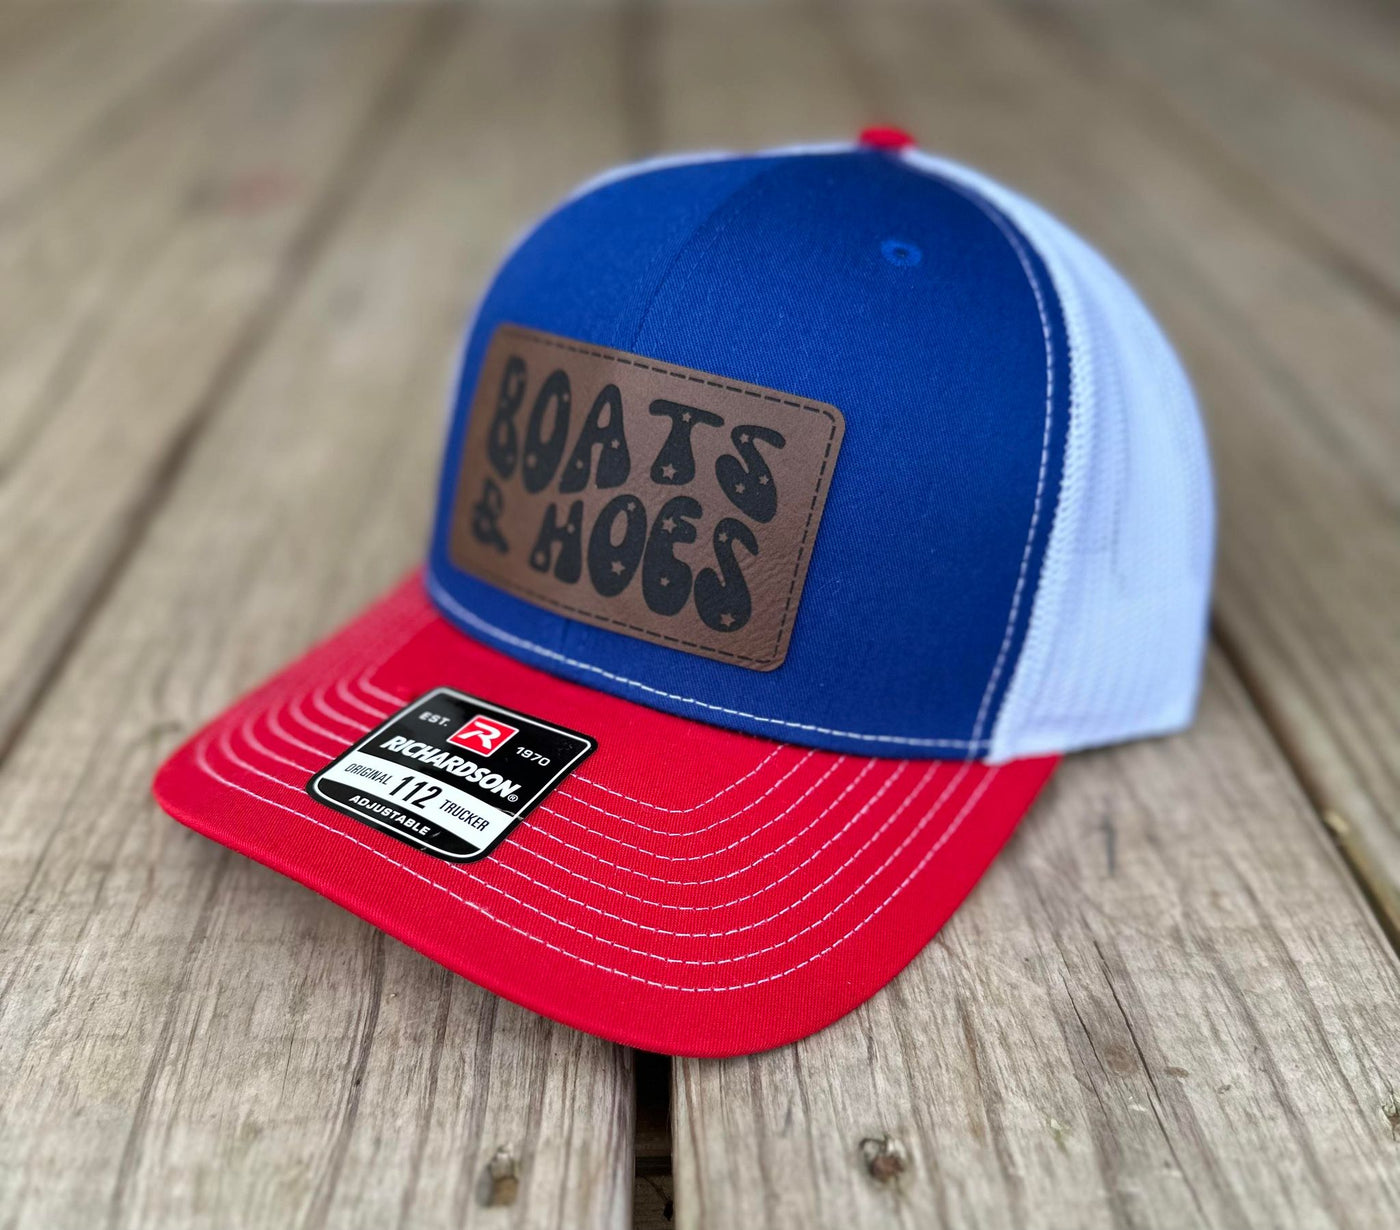 Red White Blue Boats Hoes Patch Hat